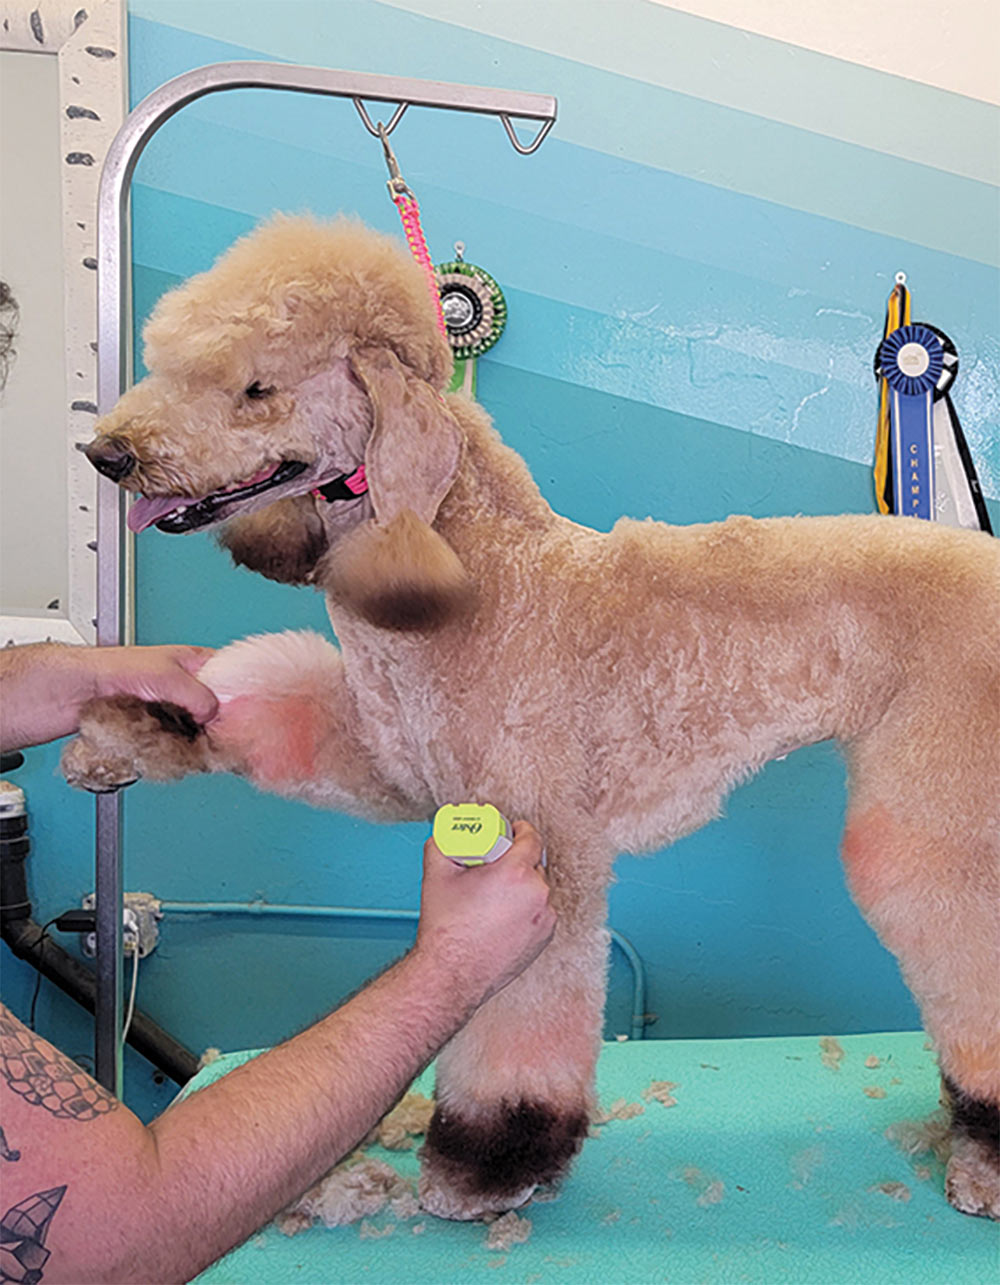 Trimming top of poodle's legs